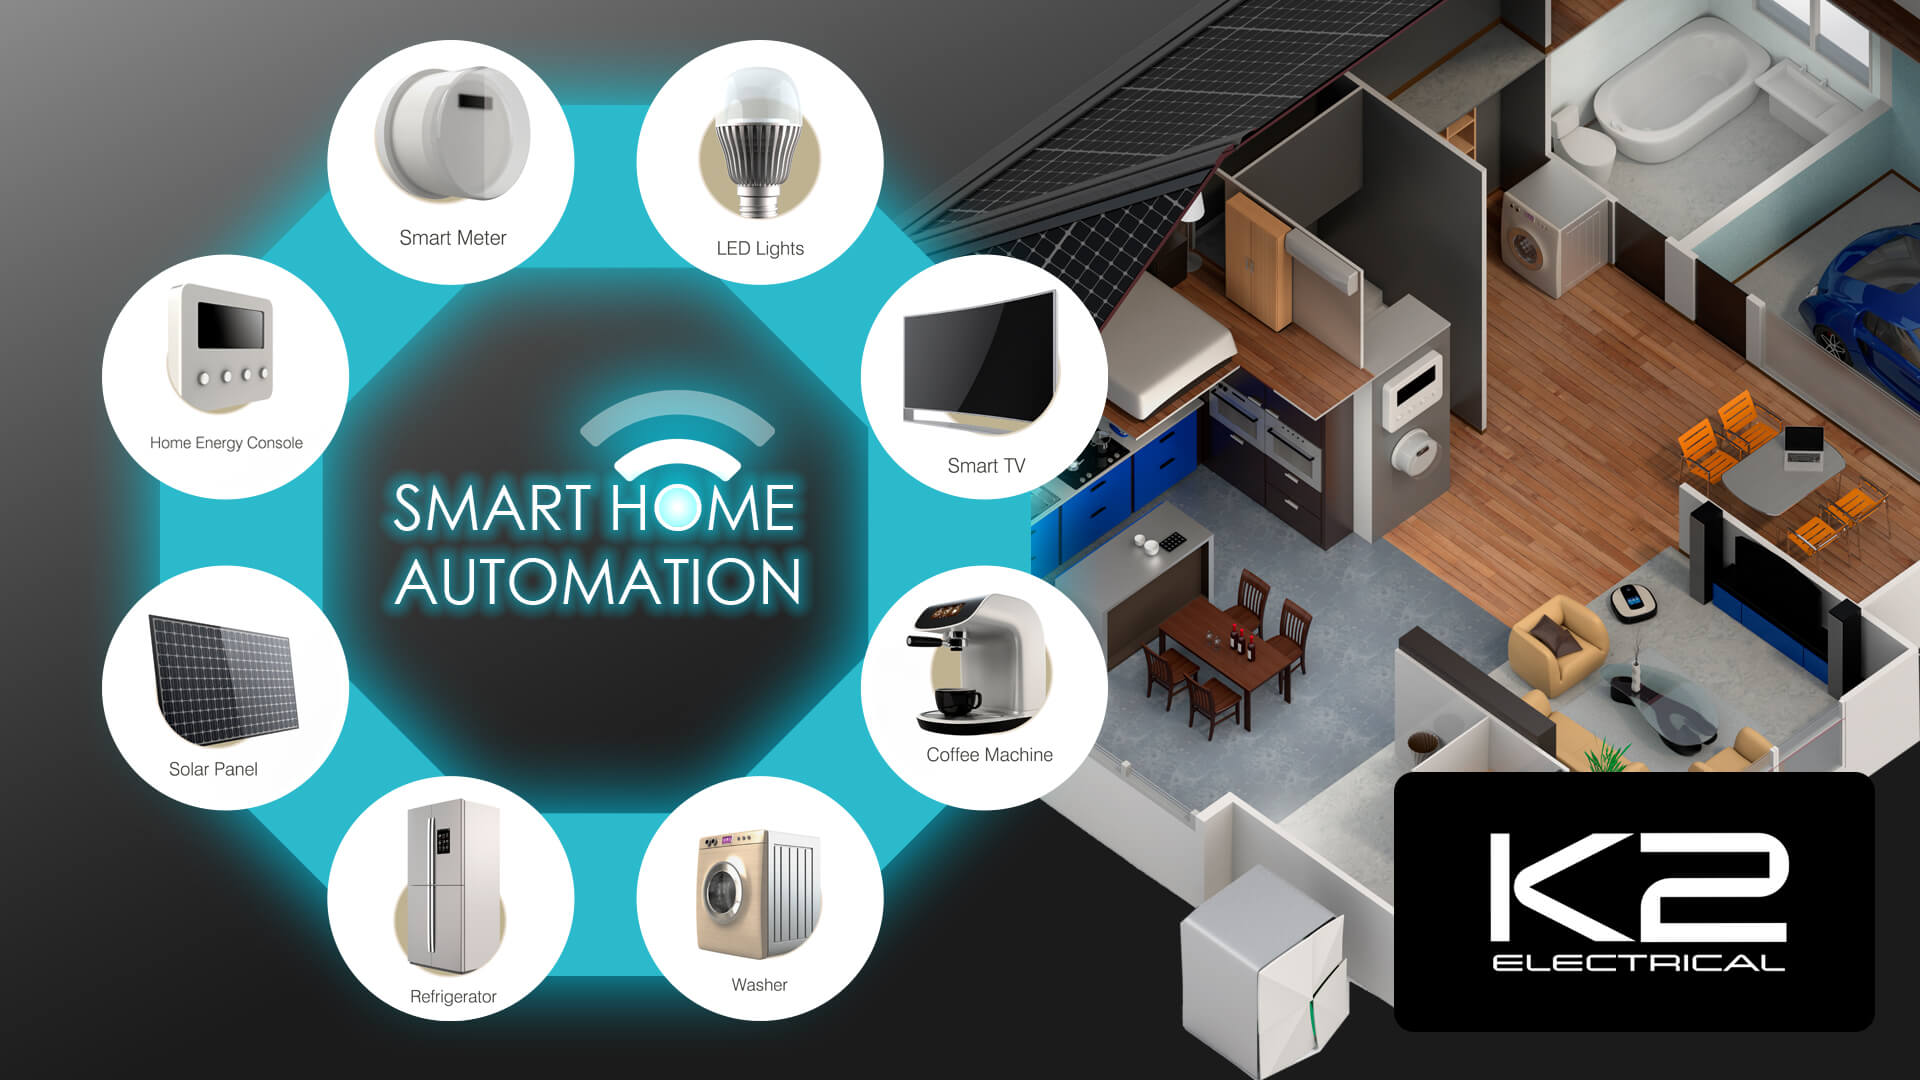 K2 Electrical Smart Home Automation and Integration Infographic